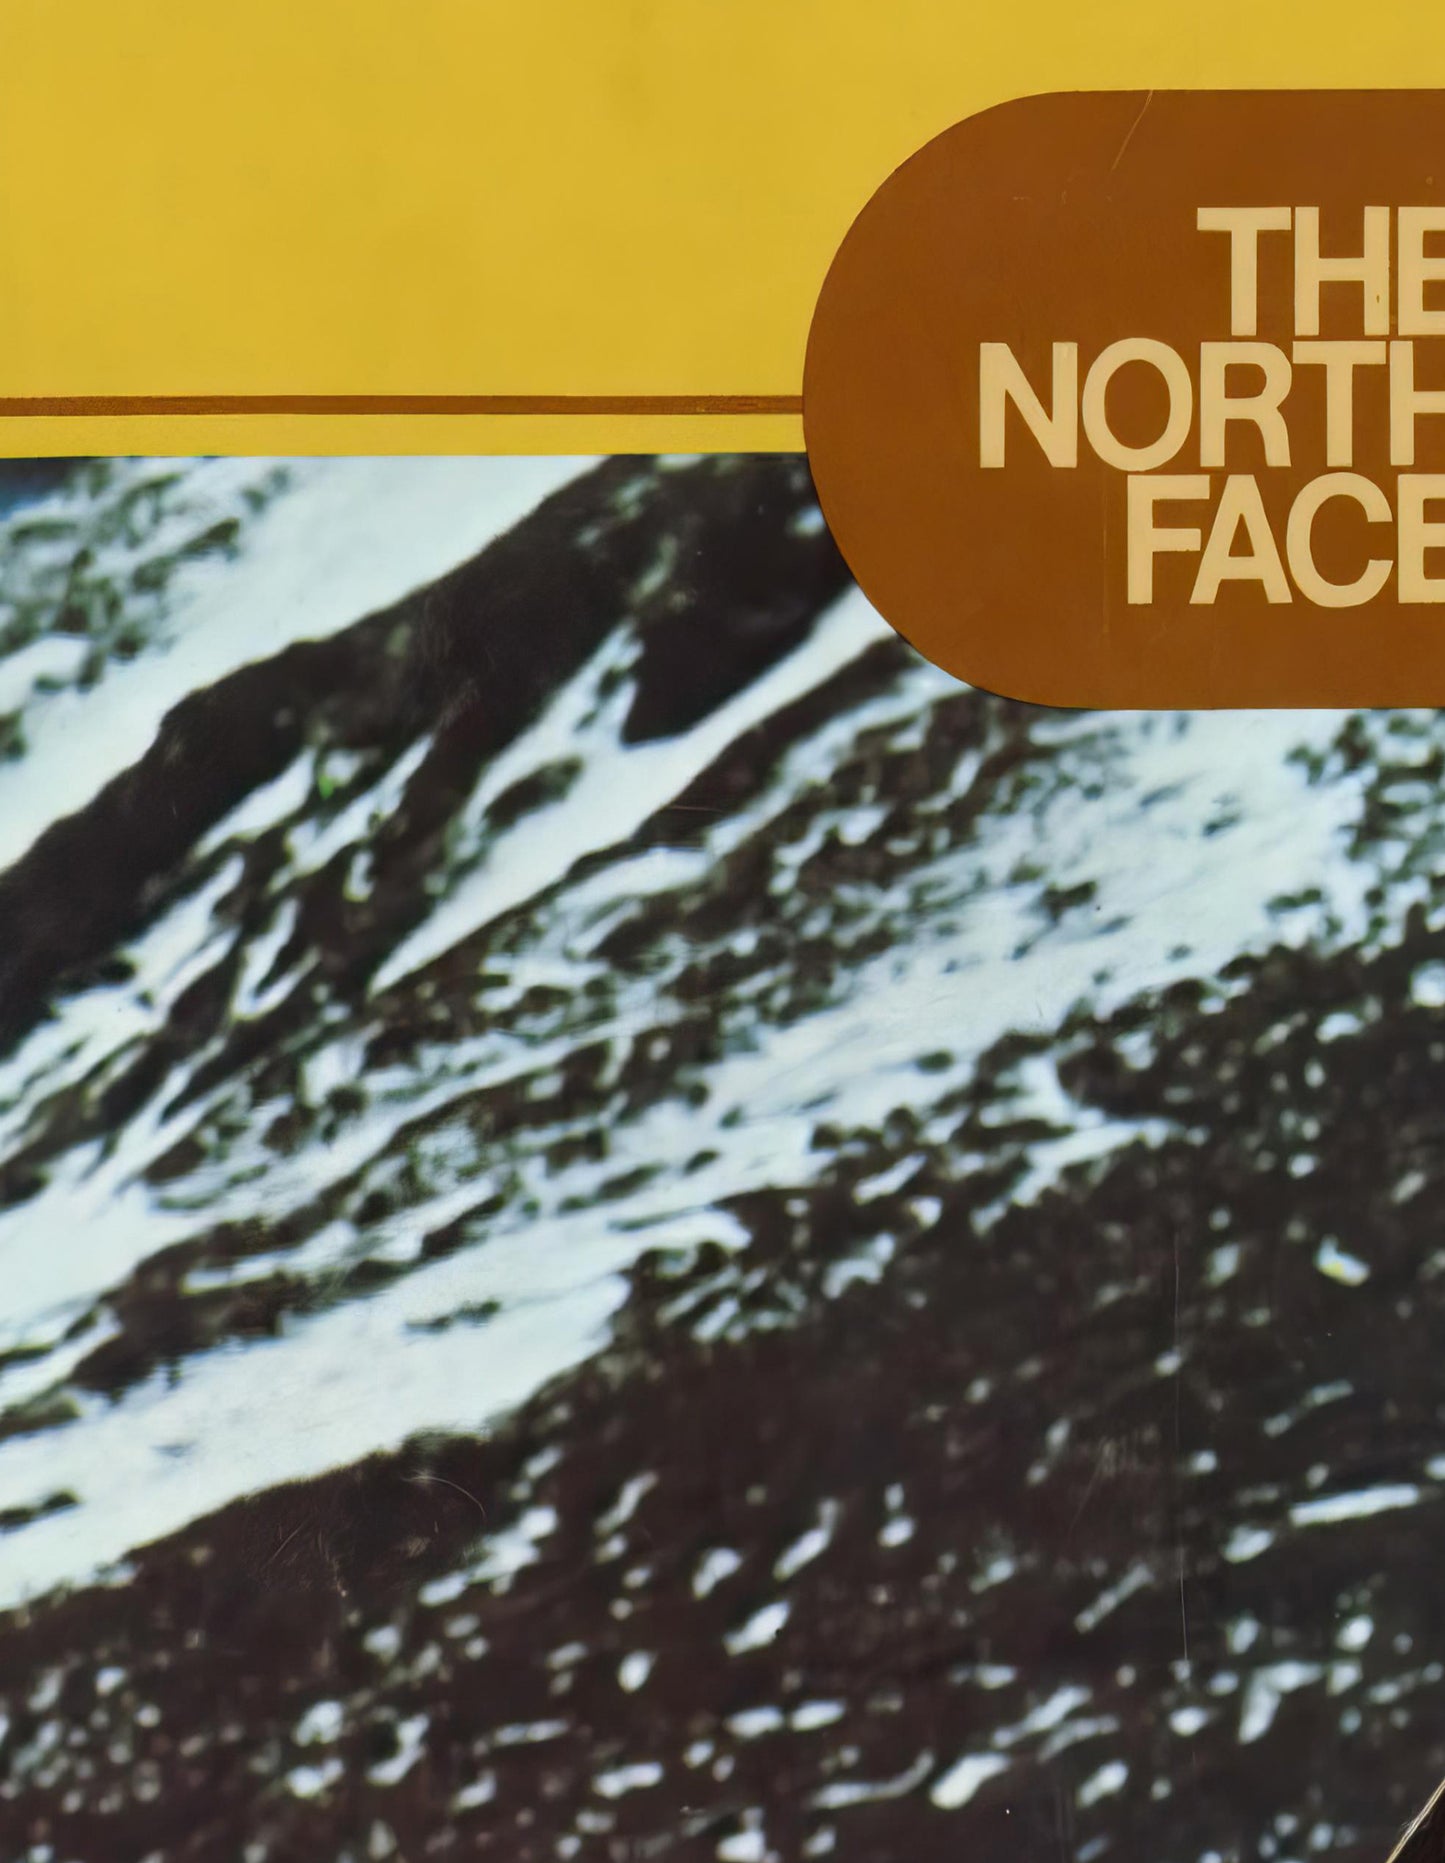 The North Face 1972 Magazine Front Cover Poster